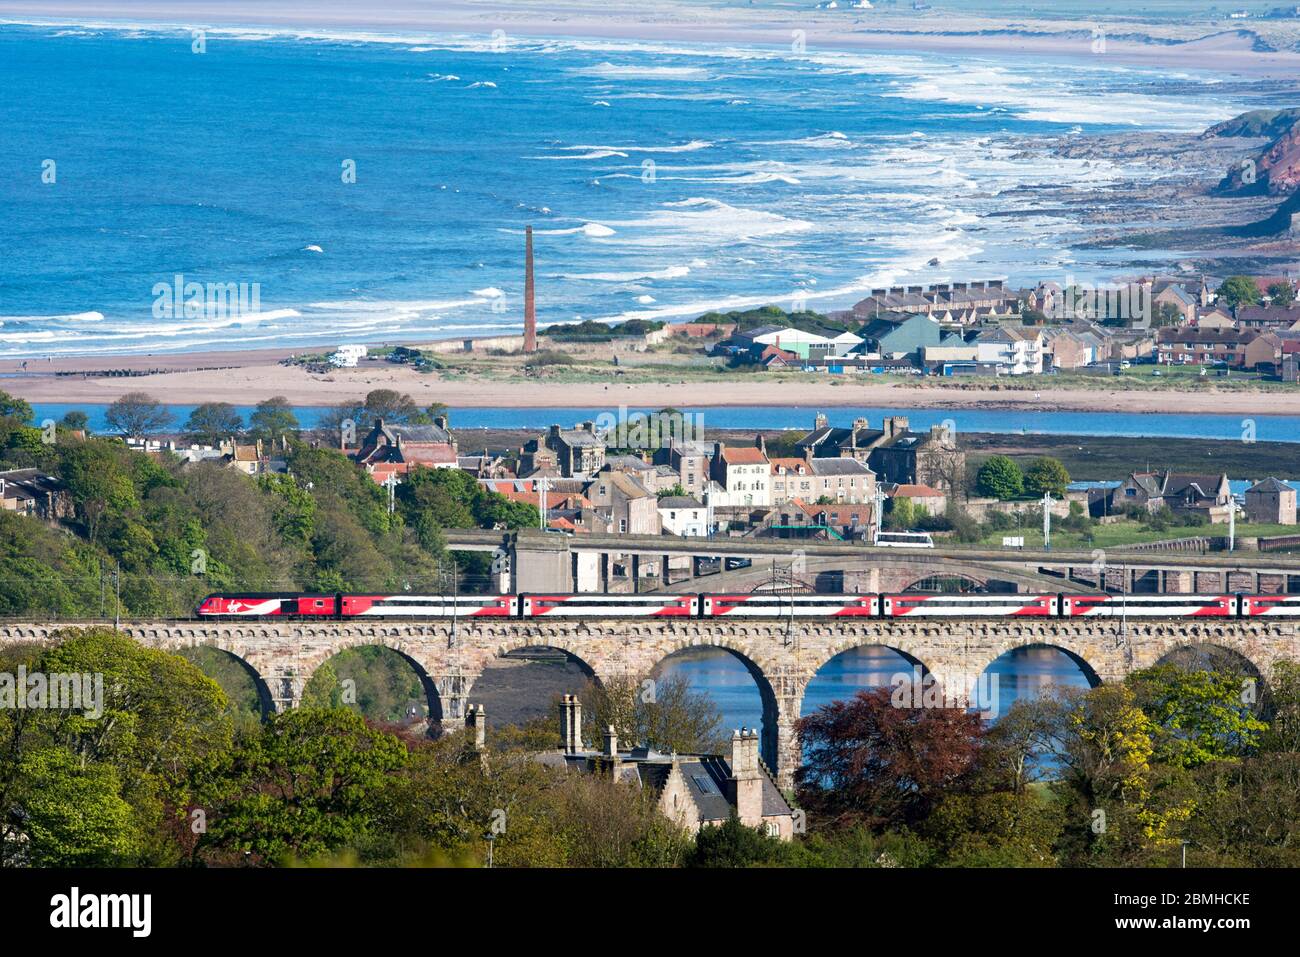 A Virgin train crosses the Royal Border rail bridge which spans the River Tweed at Berwick-Upon-Tweed, Northumberland, England. Stock Photo